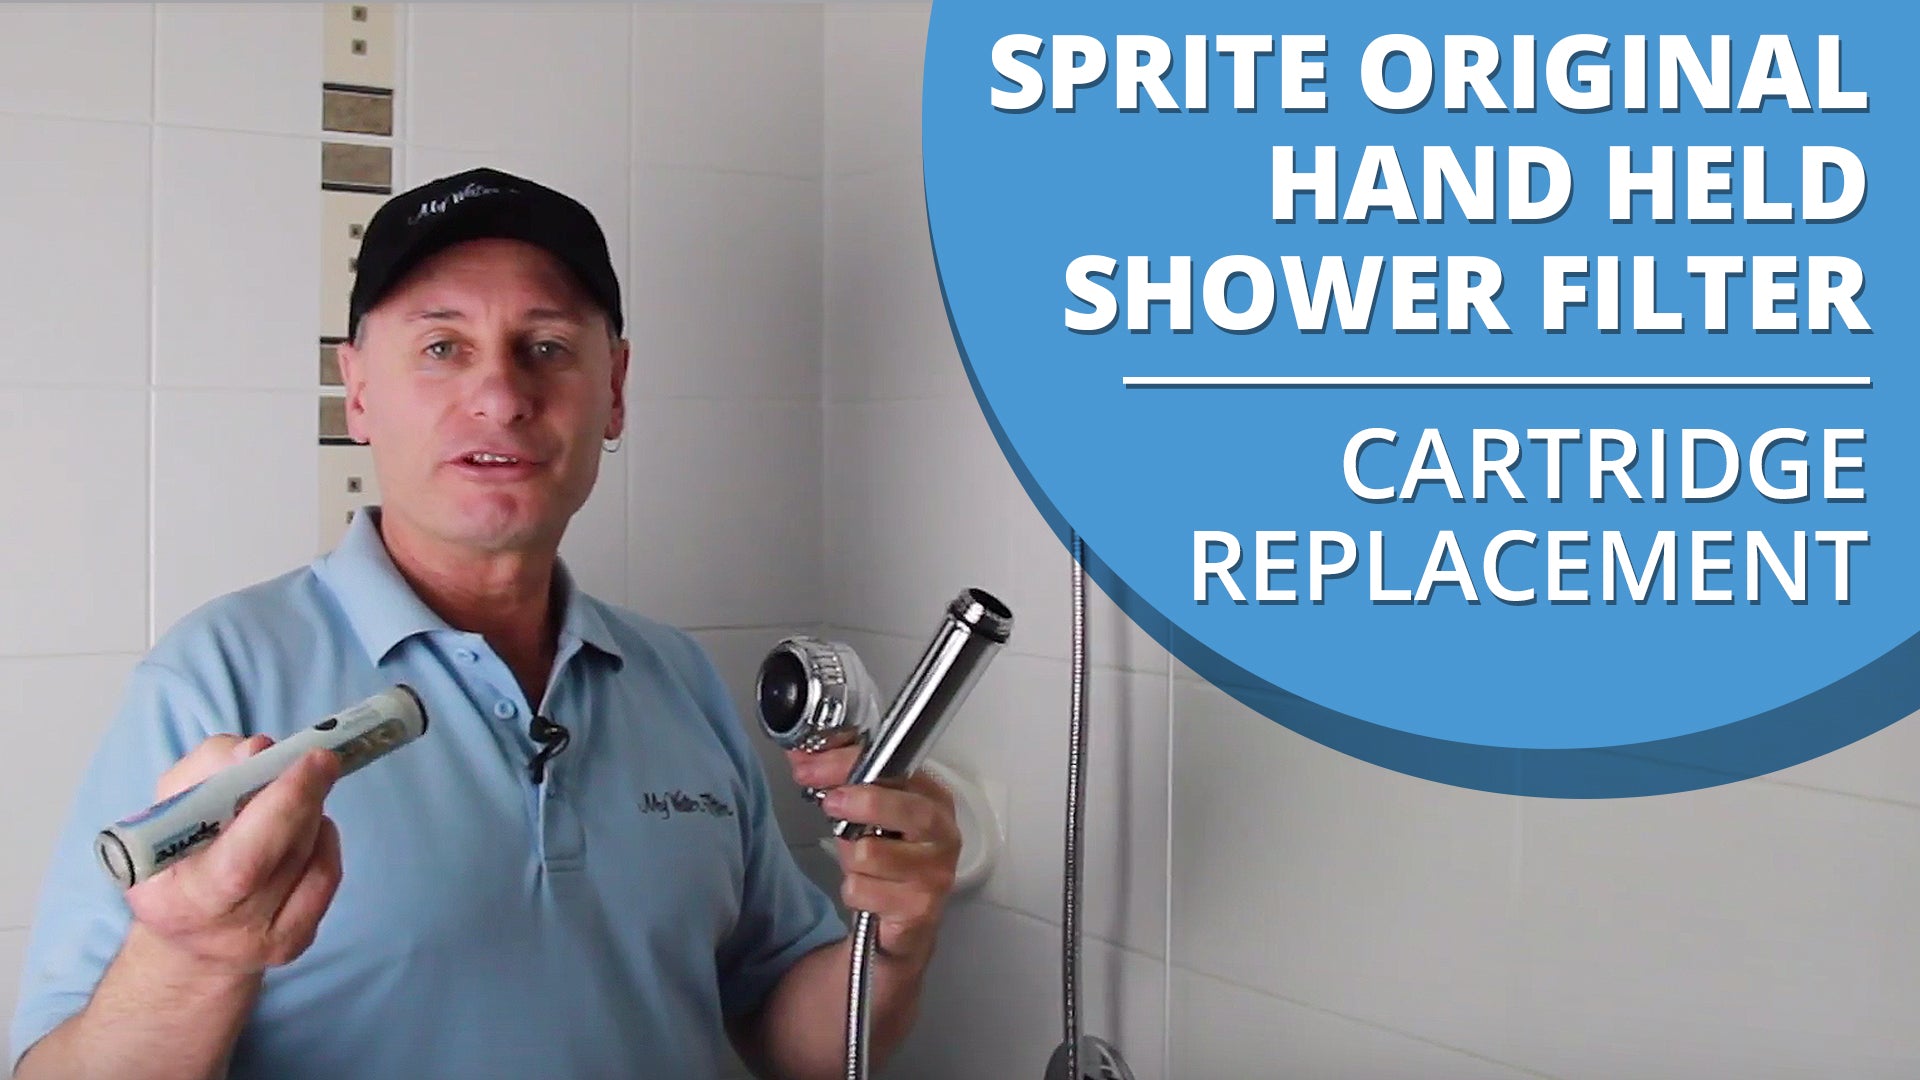 [VIDEO] How to change the cartridge in your Sprite Original Hand Held Shower Handle